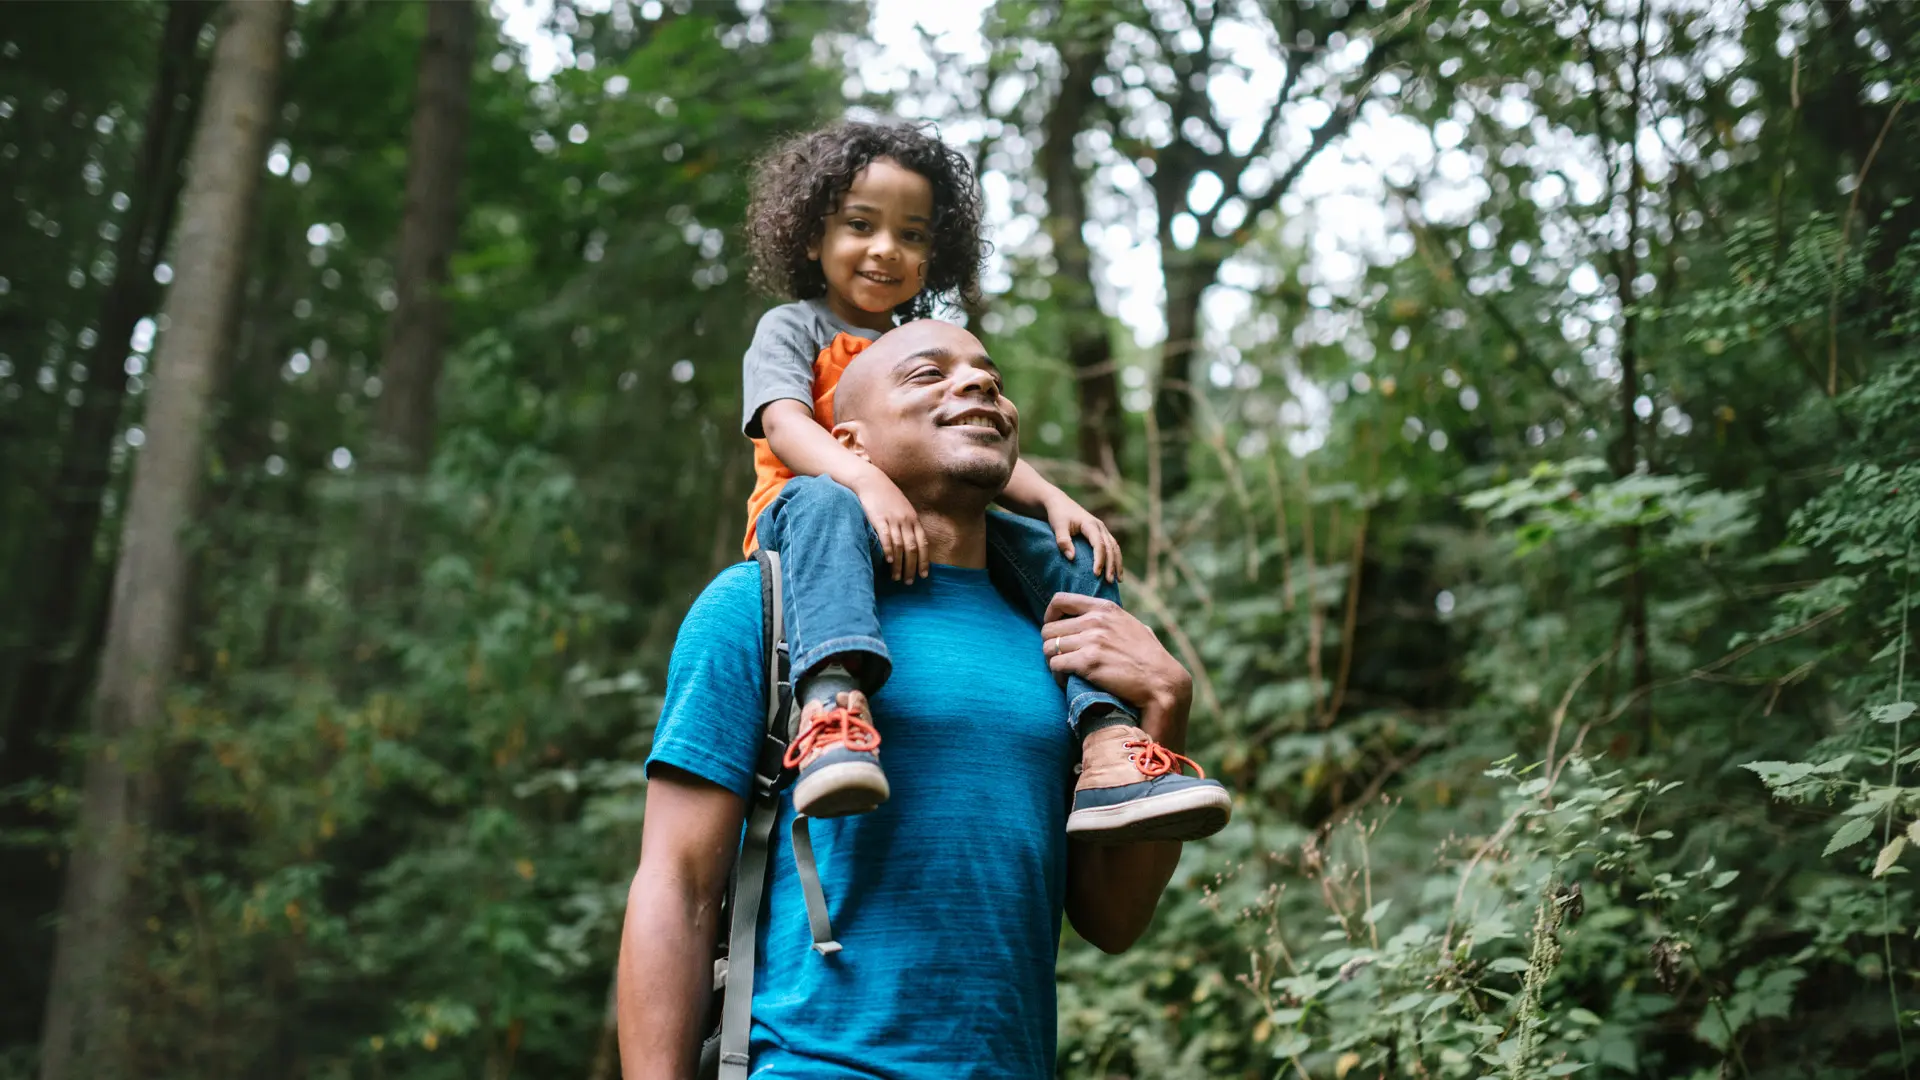 A man walks through a trail while his young daughter sits on his shoulders